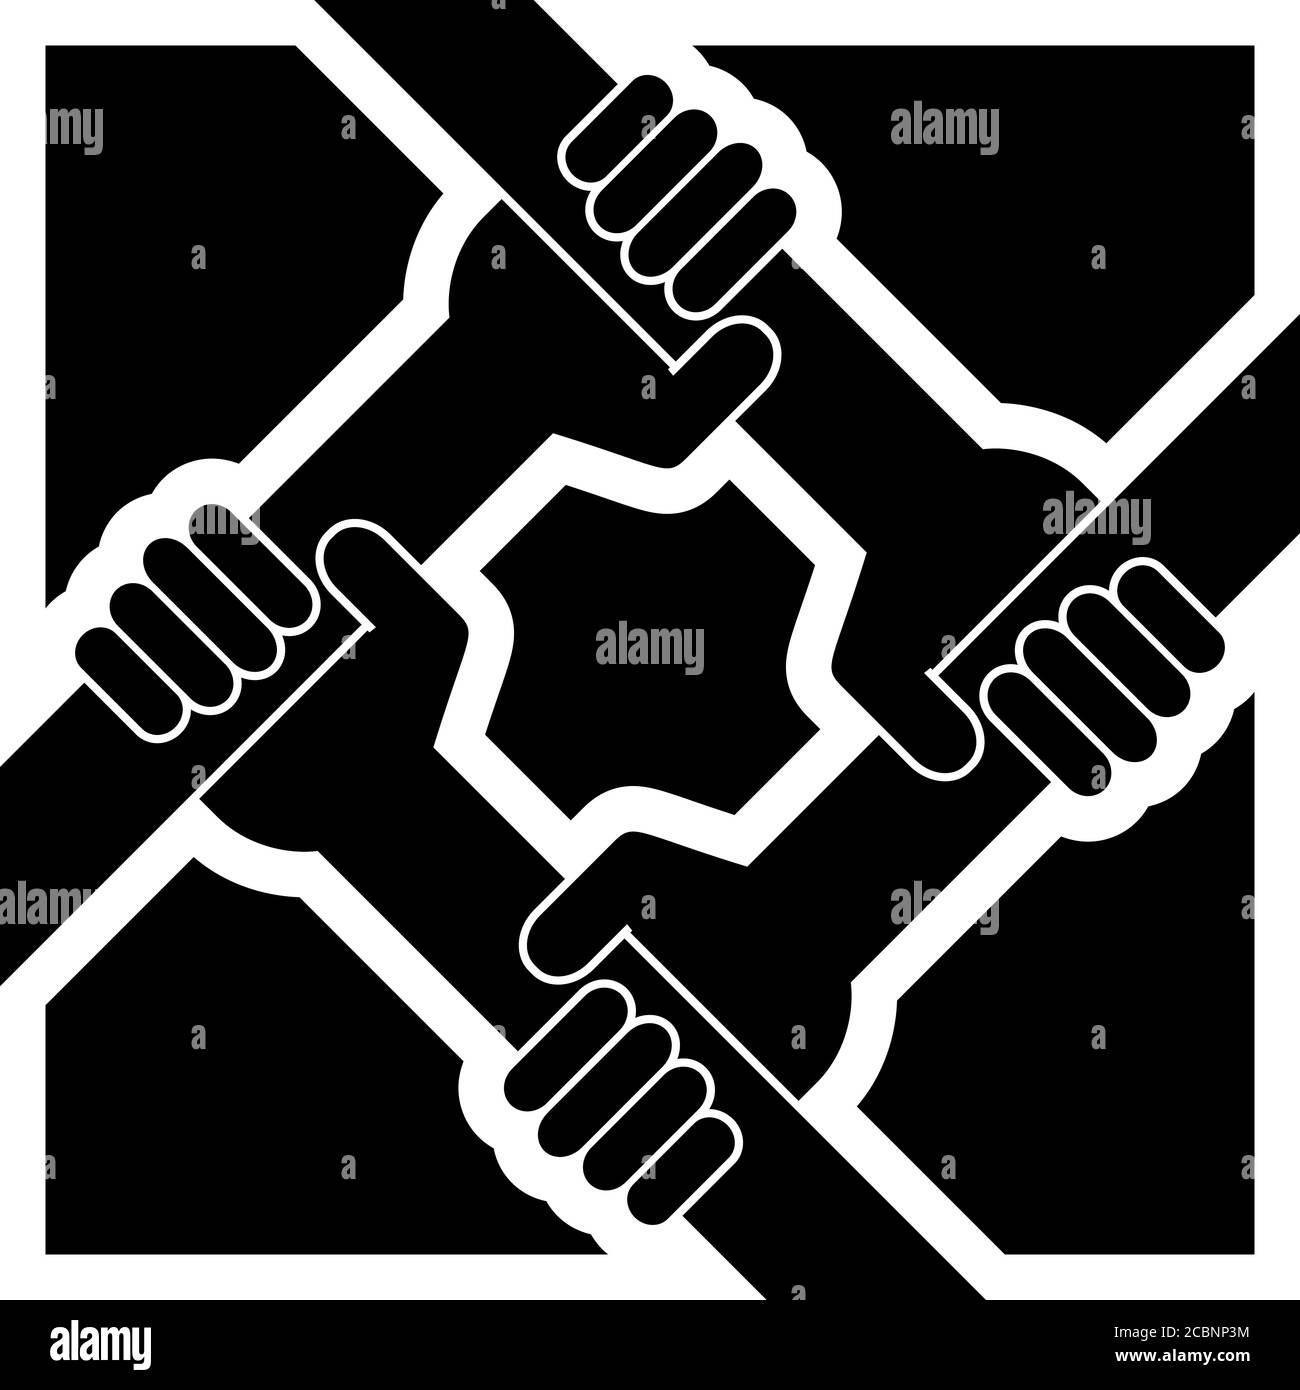 strong together - mutual brotherly support Stock Vector